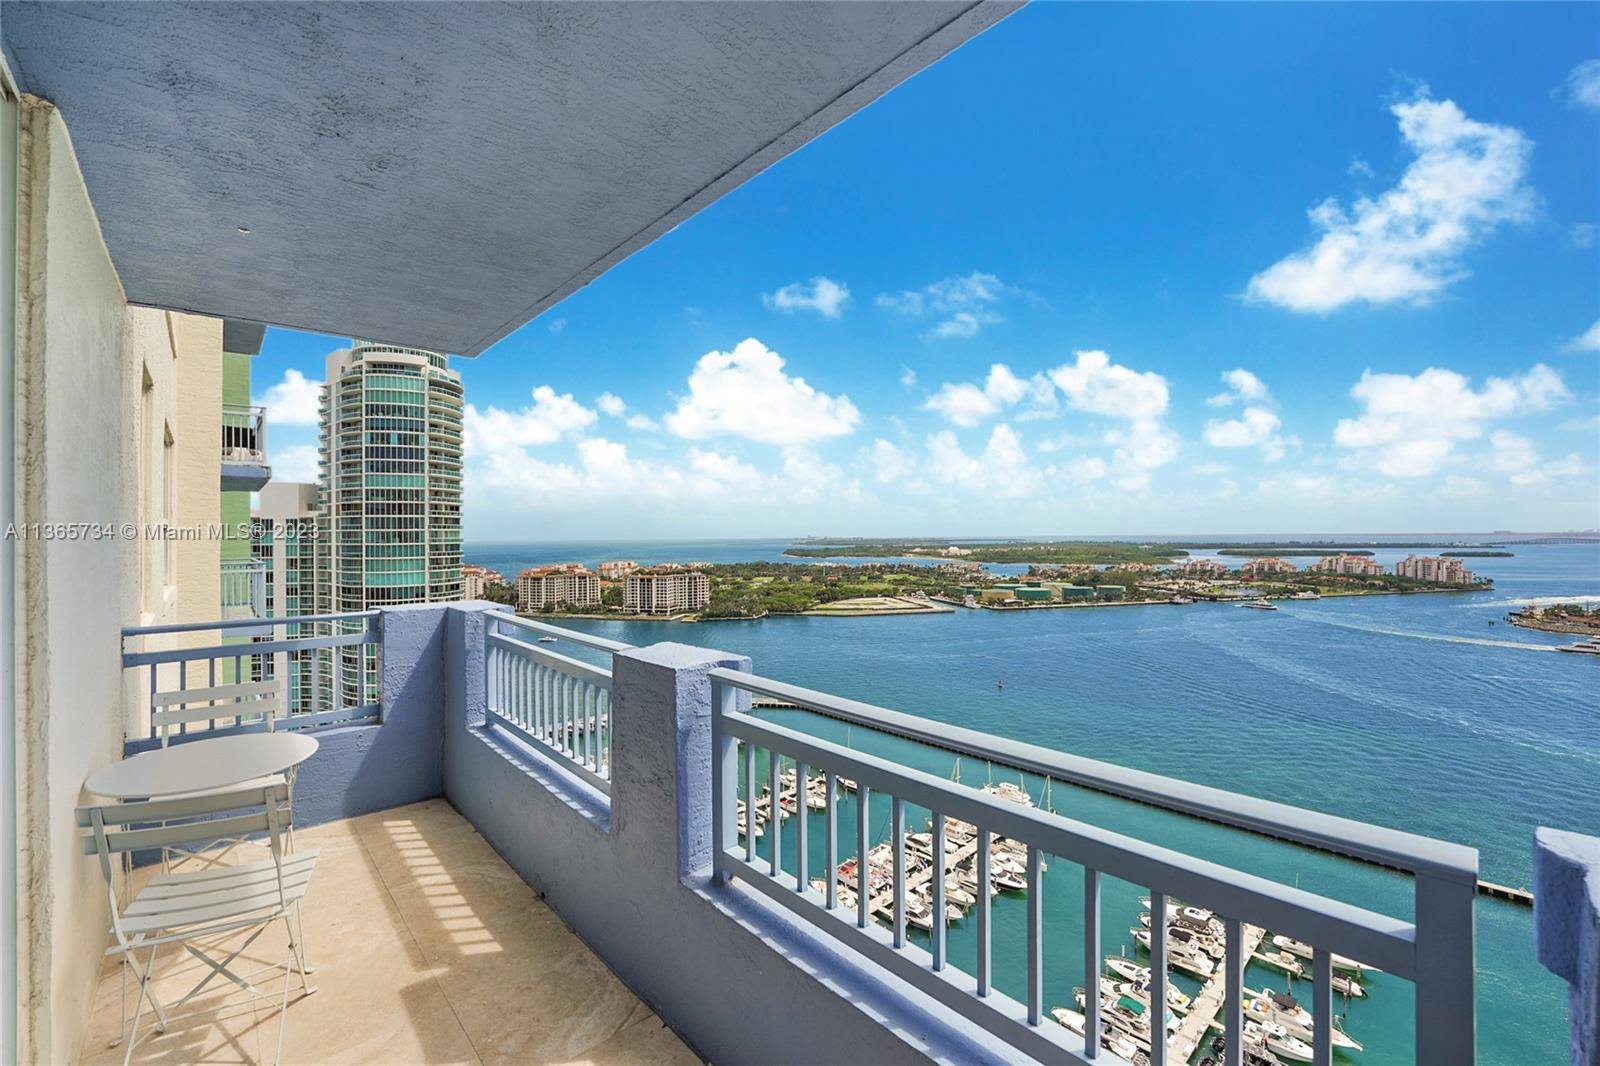 Stunning, Breathtaking Endless Views at Yacht Club Portofino located in Exclusive, Vibrant South of Fifth neighborhood in South Beach.